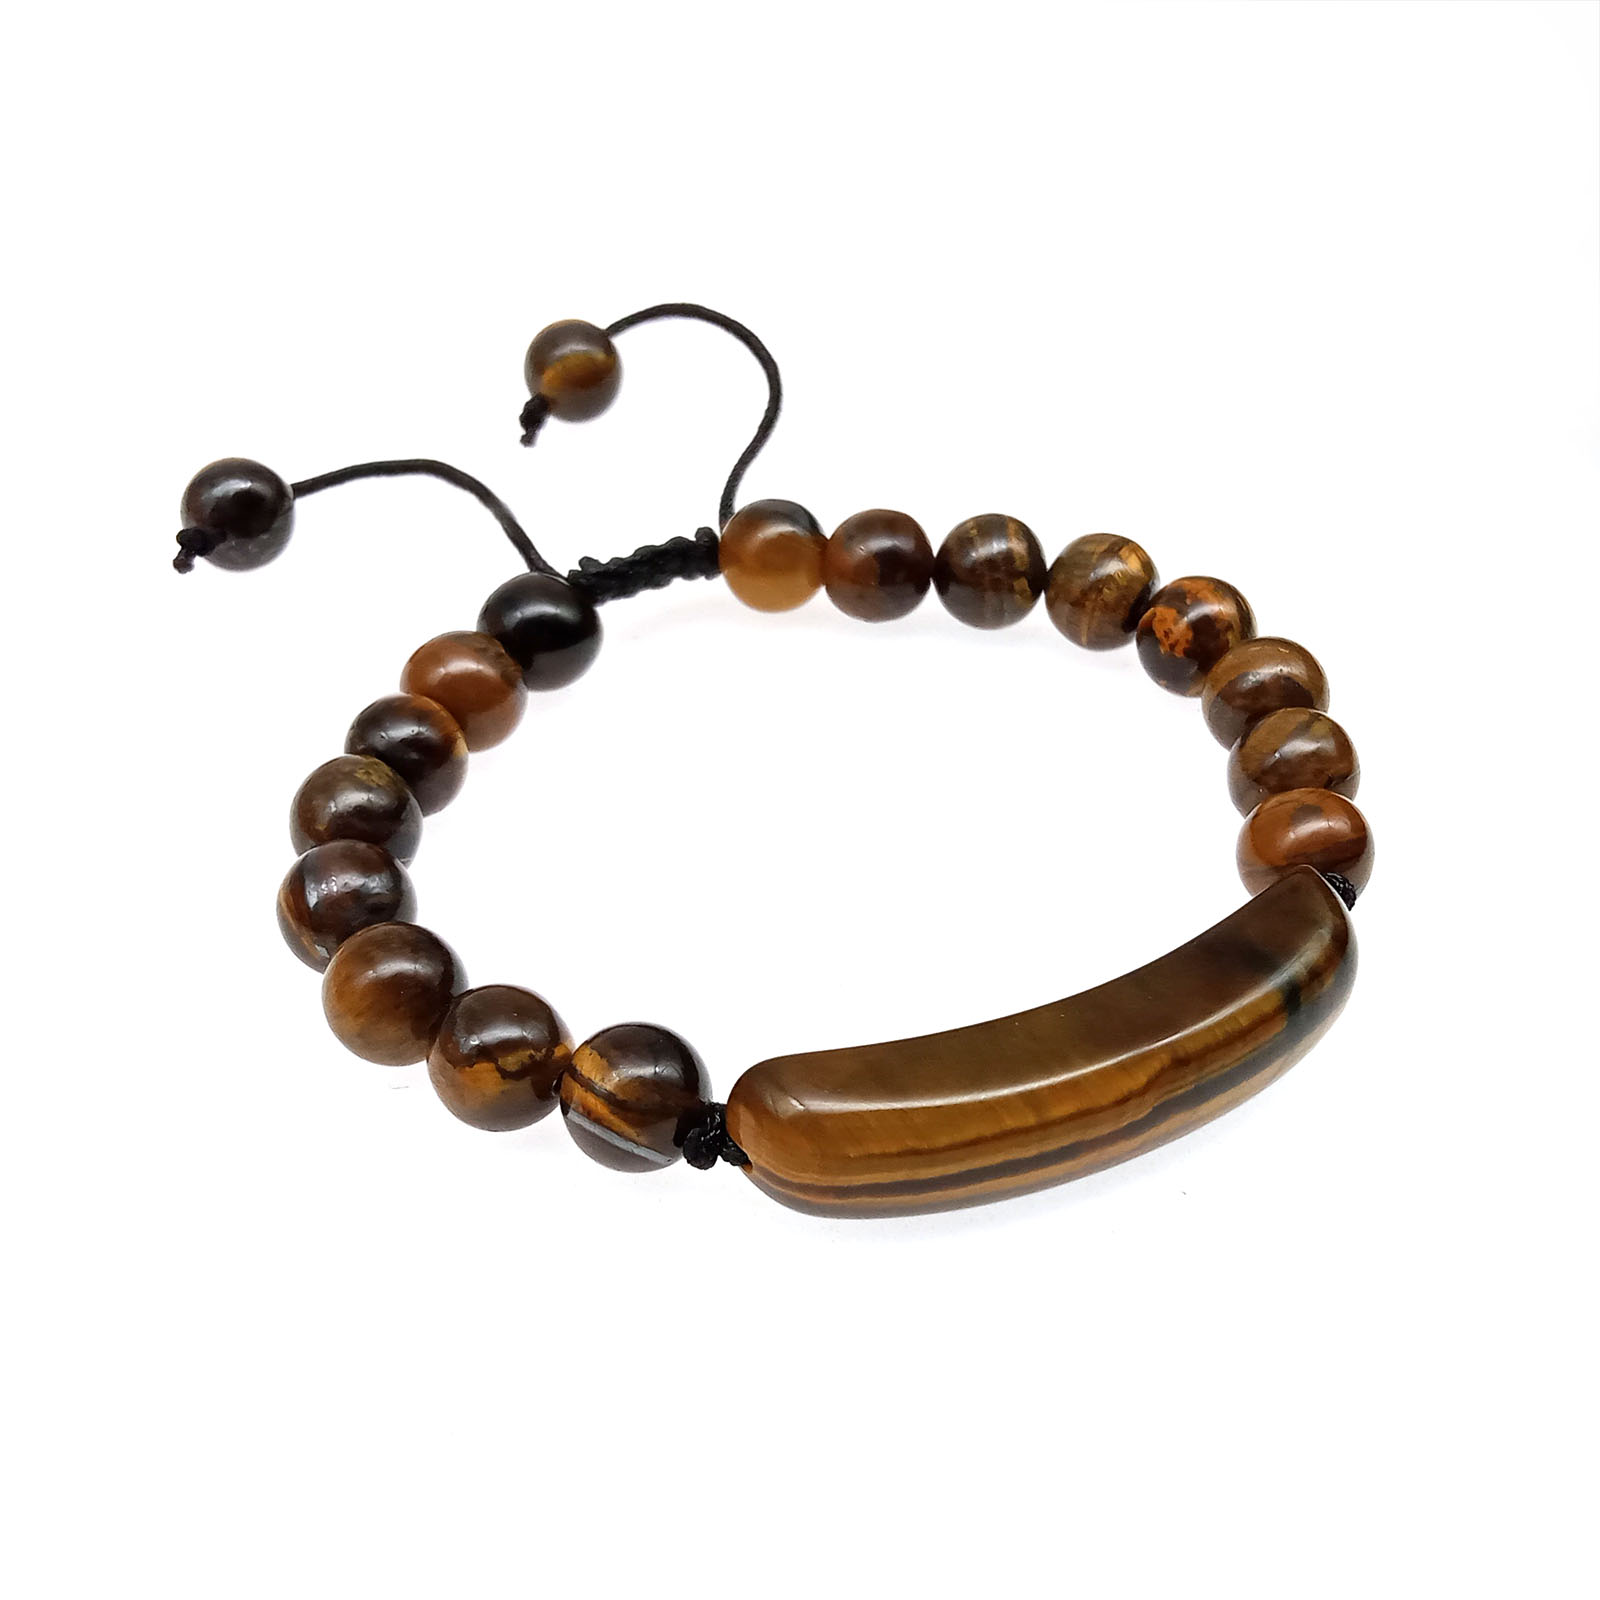 Adjustable size, made of 18 8mm round beads and a long strip